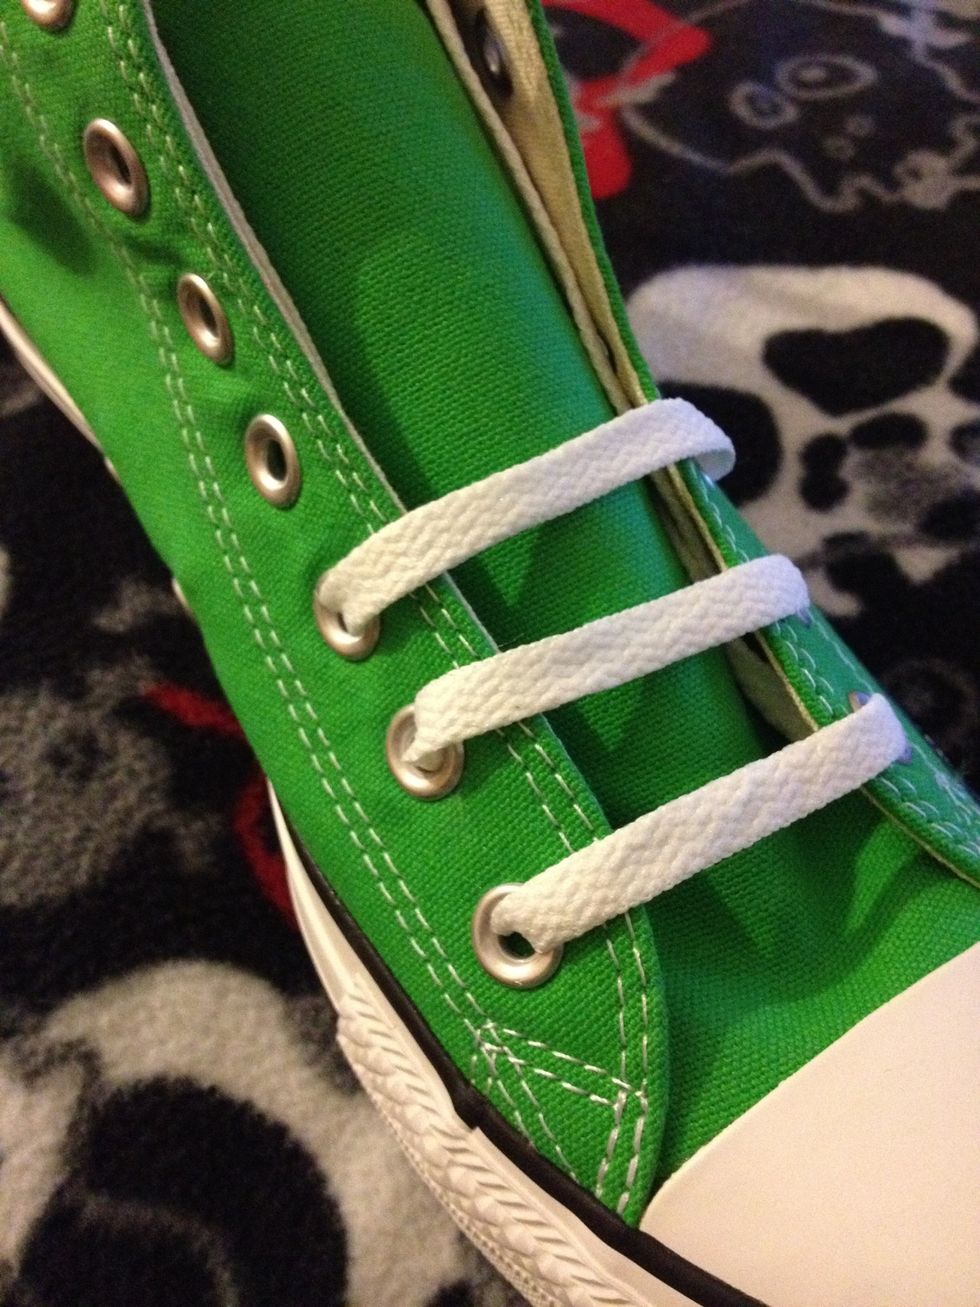 How to ladder lace your converse - B+C Guides